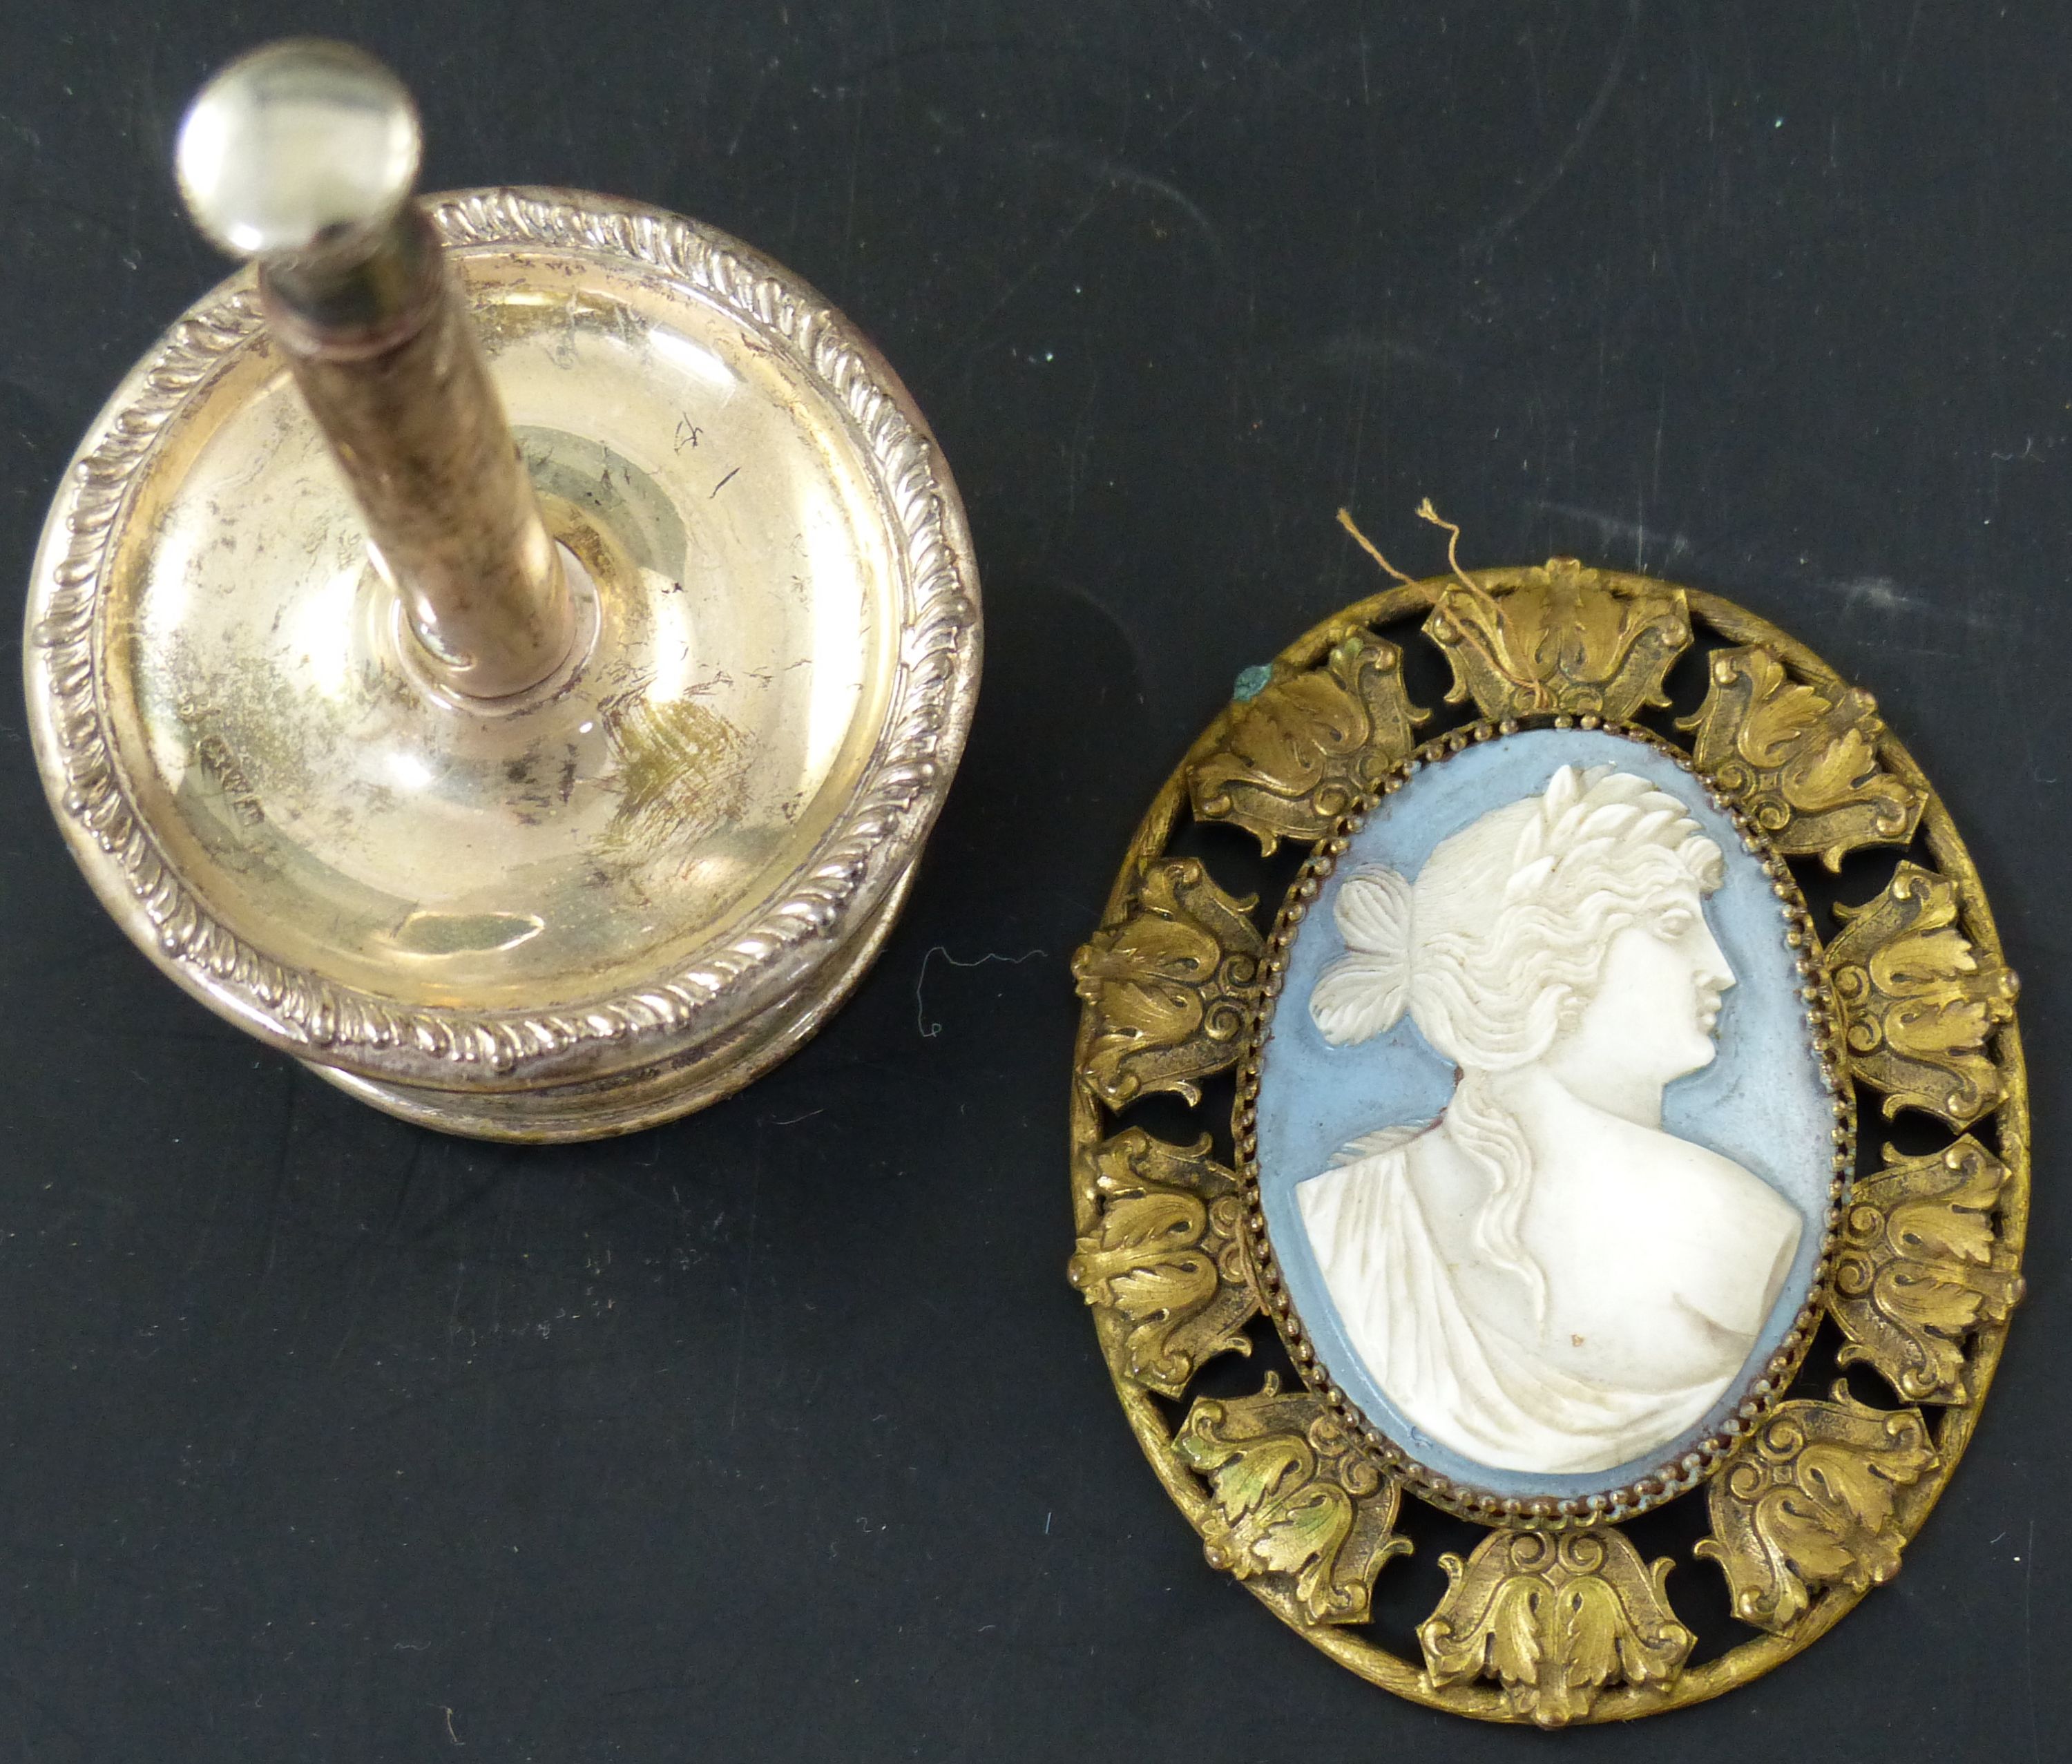 An Edwardian silver mounted vertical cigar cutter with dished stem, Chester, 1901, 10.5cm and a jasper cameo plaque